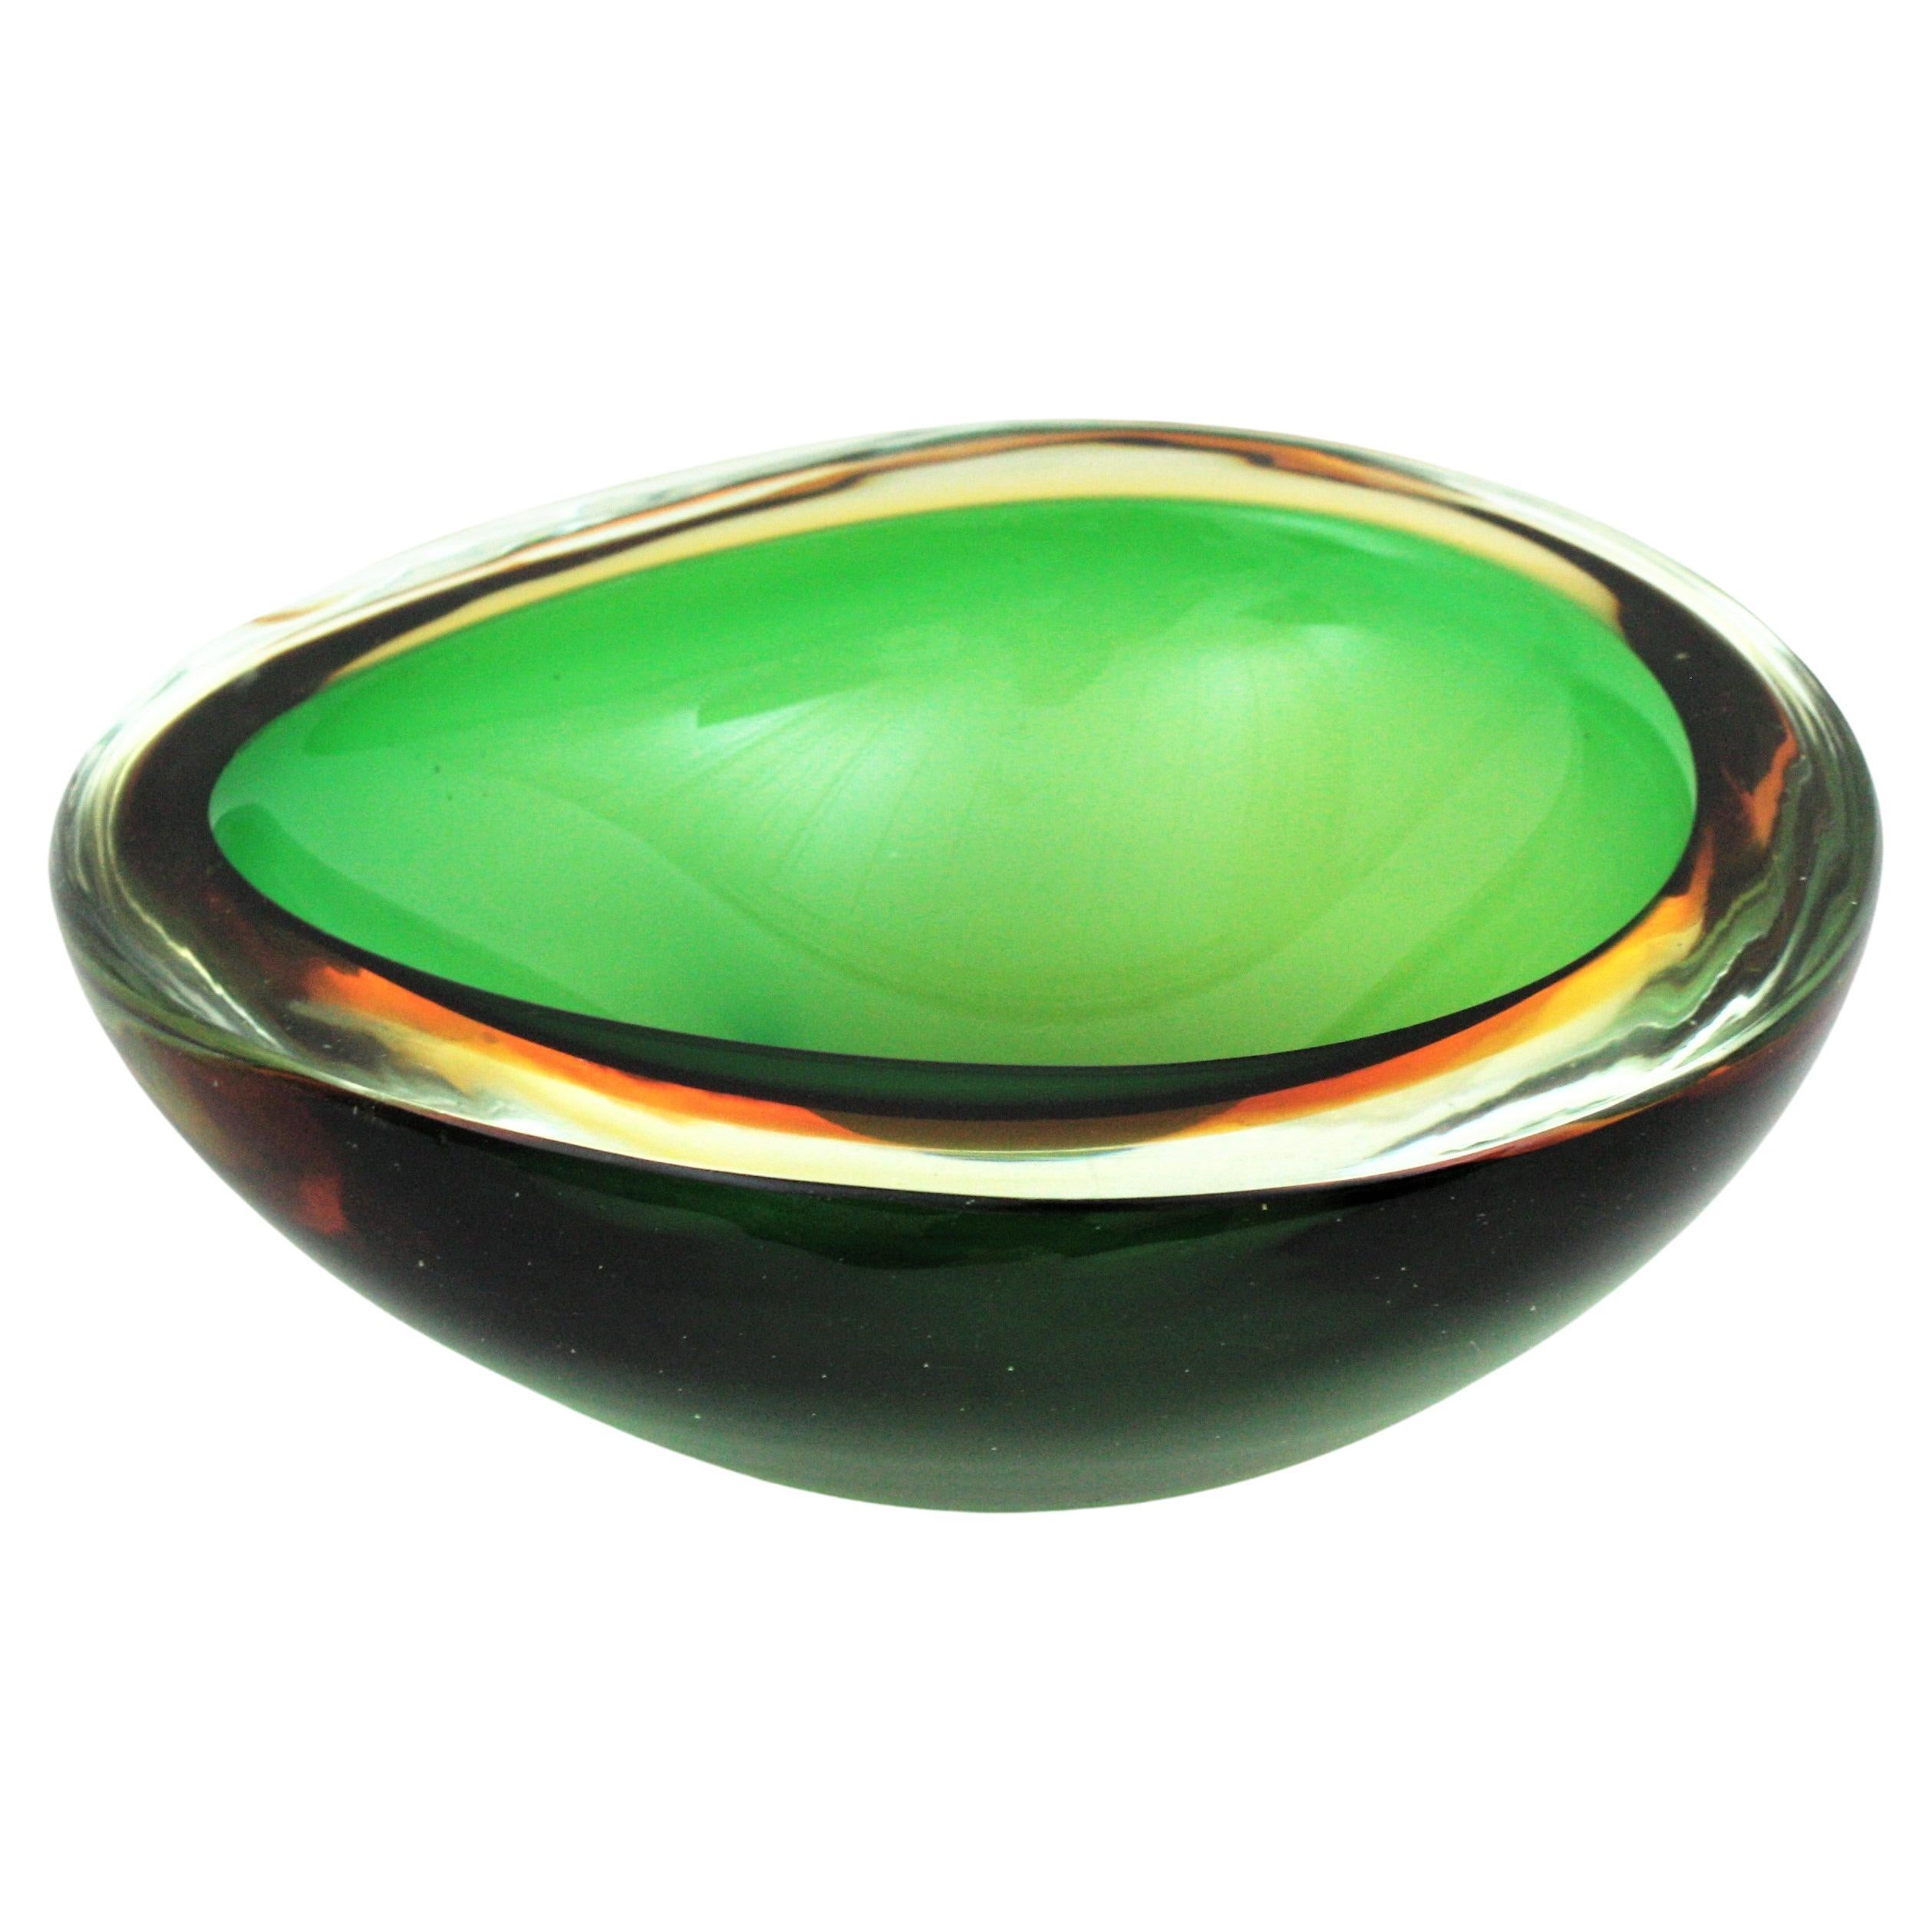 Massive hand blown green, yellow and clear ovoid shaped geode Murano glass art bowl / centerpiece. Flavio Poli for Seguso Vetri d'Arte, Italy, 1950s.
This magnificent Sommerso green yellow bowl is very large and heavy.
The uniqueness of this